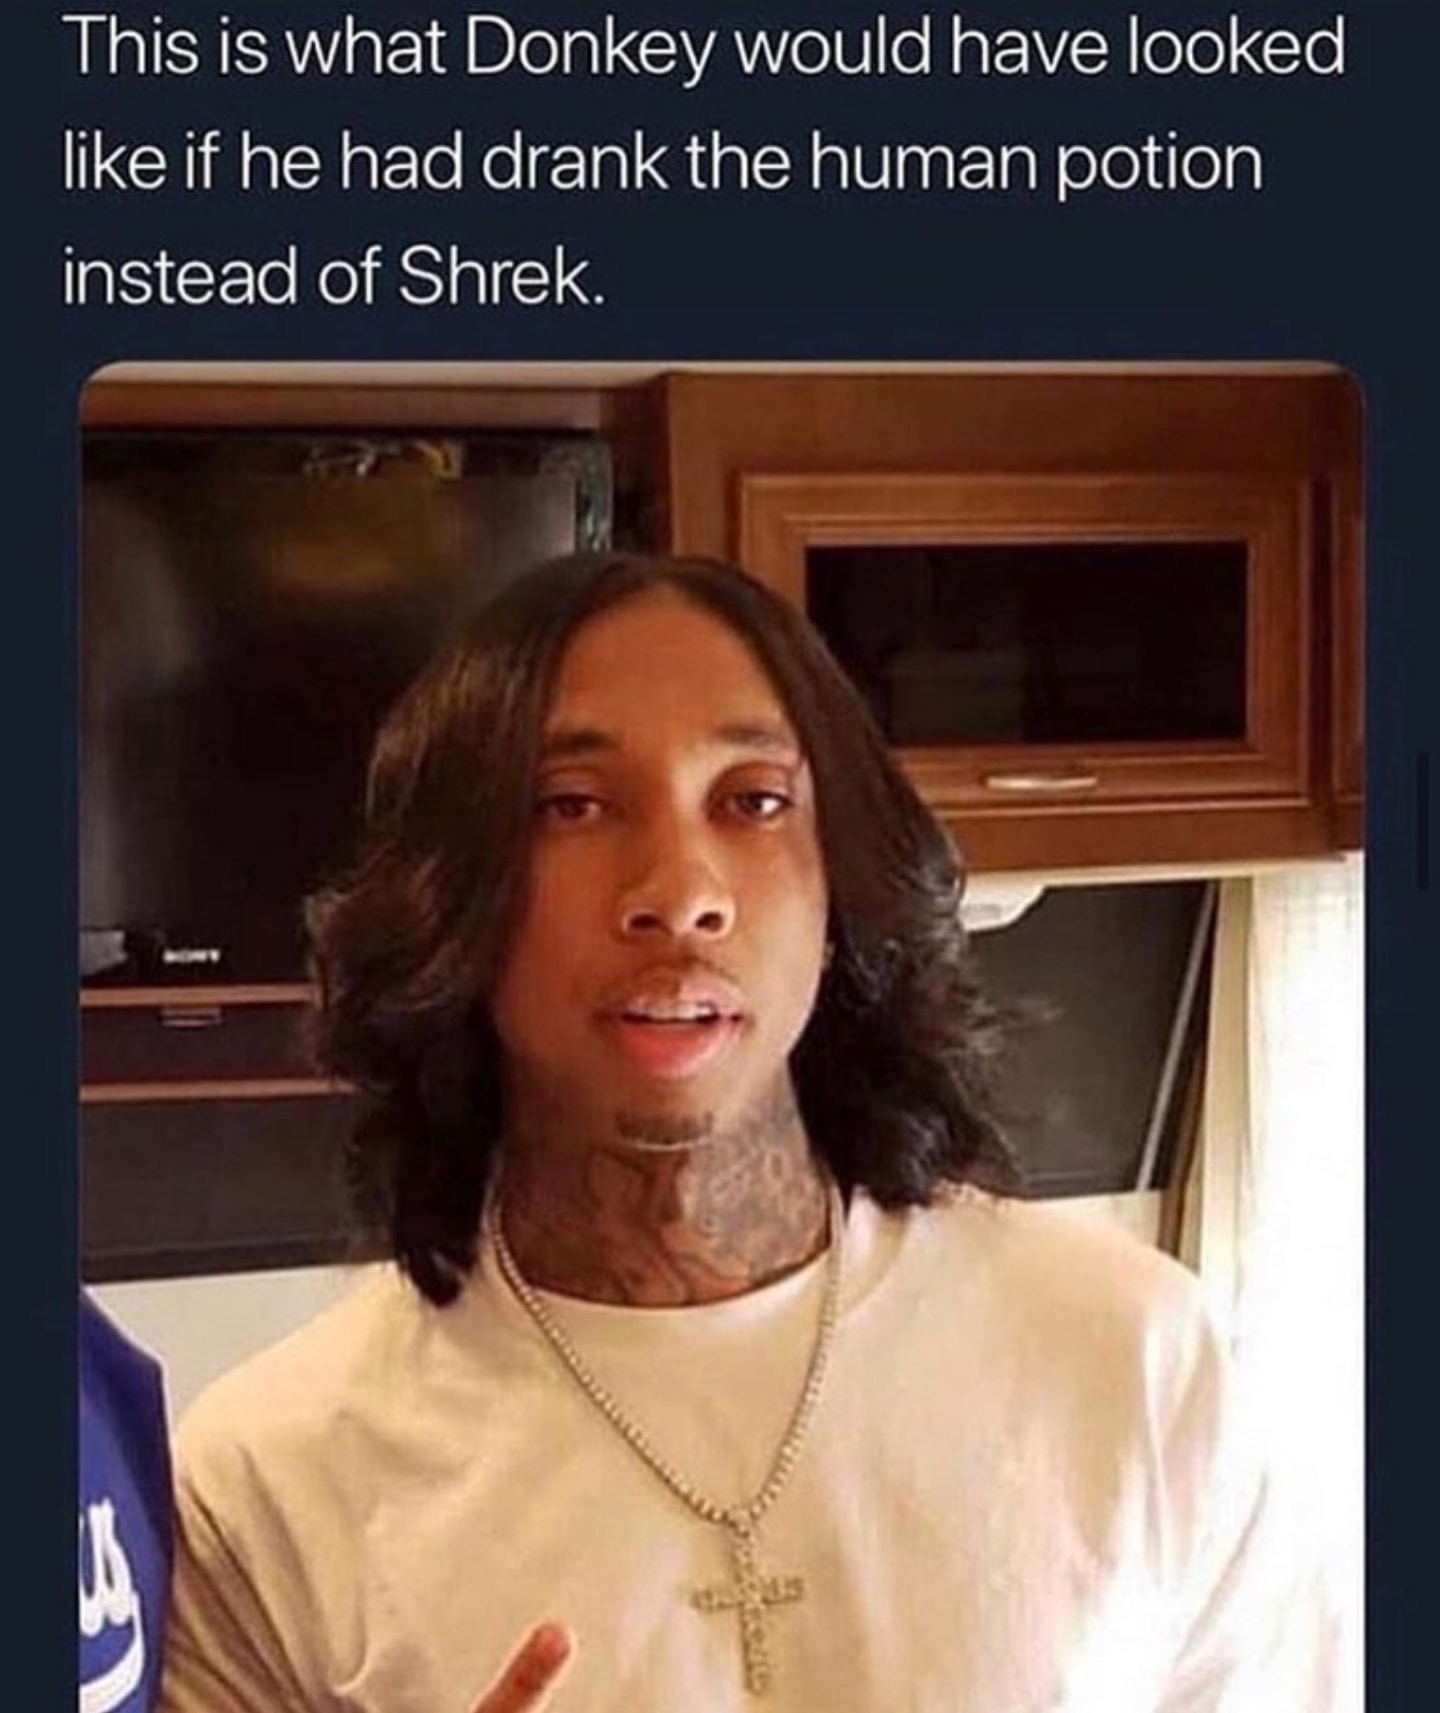 tyga blowout hair - This is what Donkey would have looked if he had drank the human potion instead of Shrek